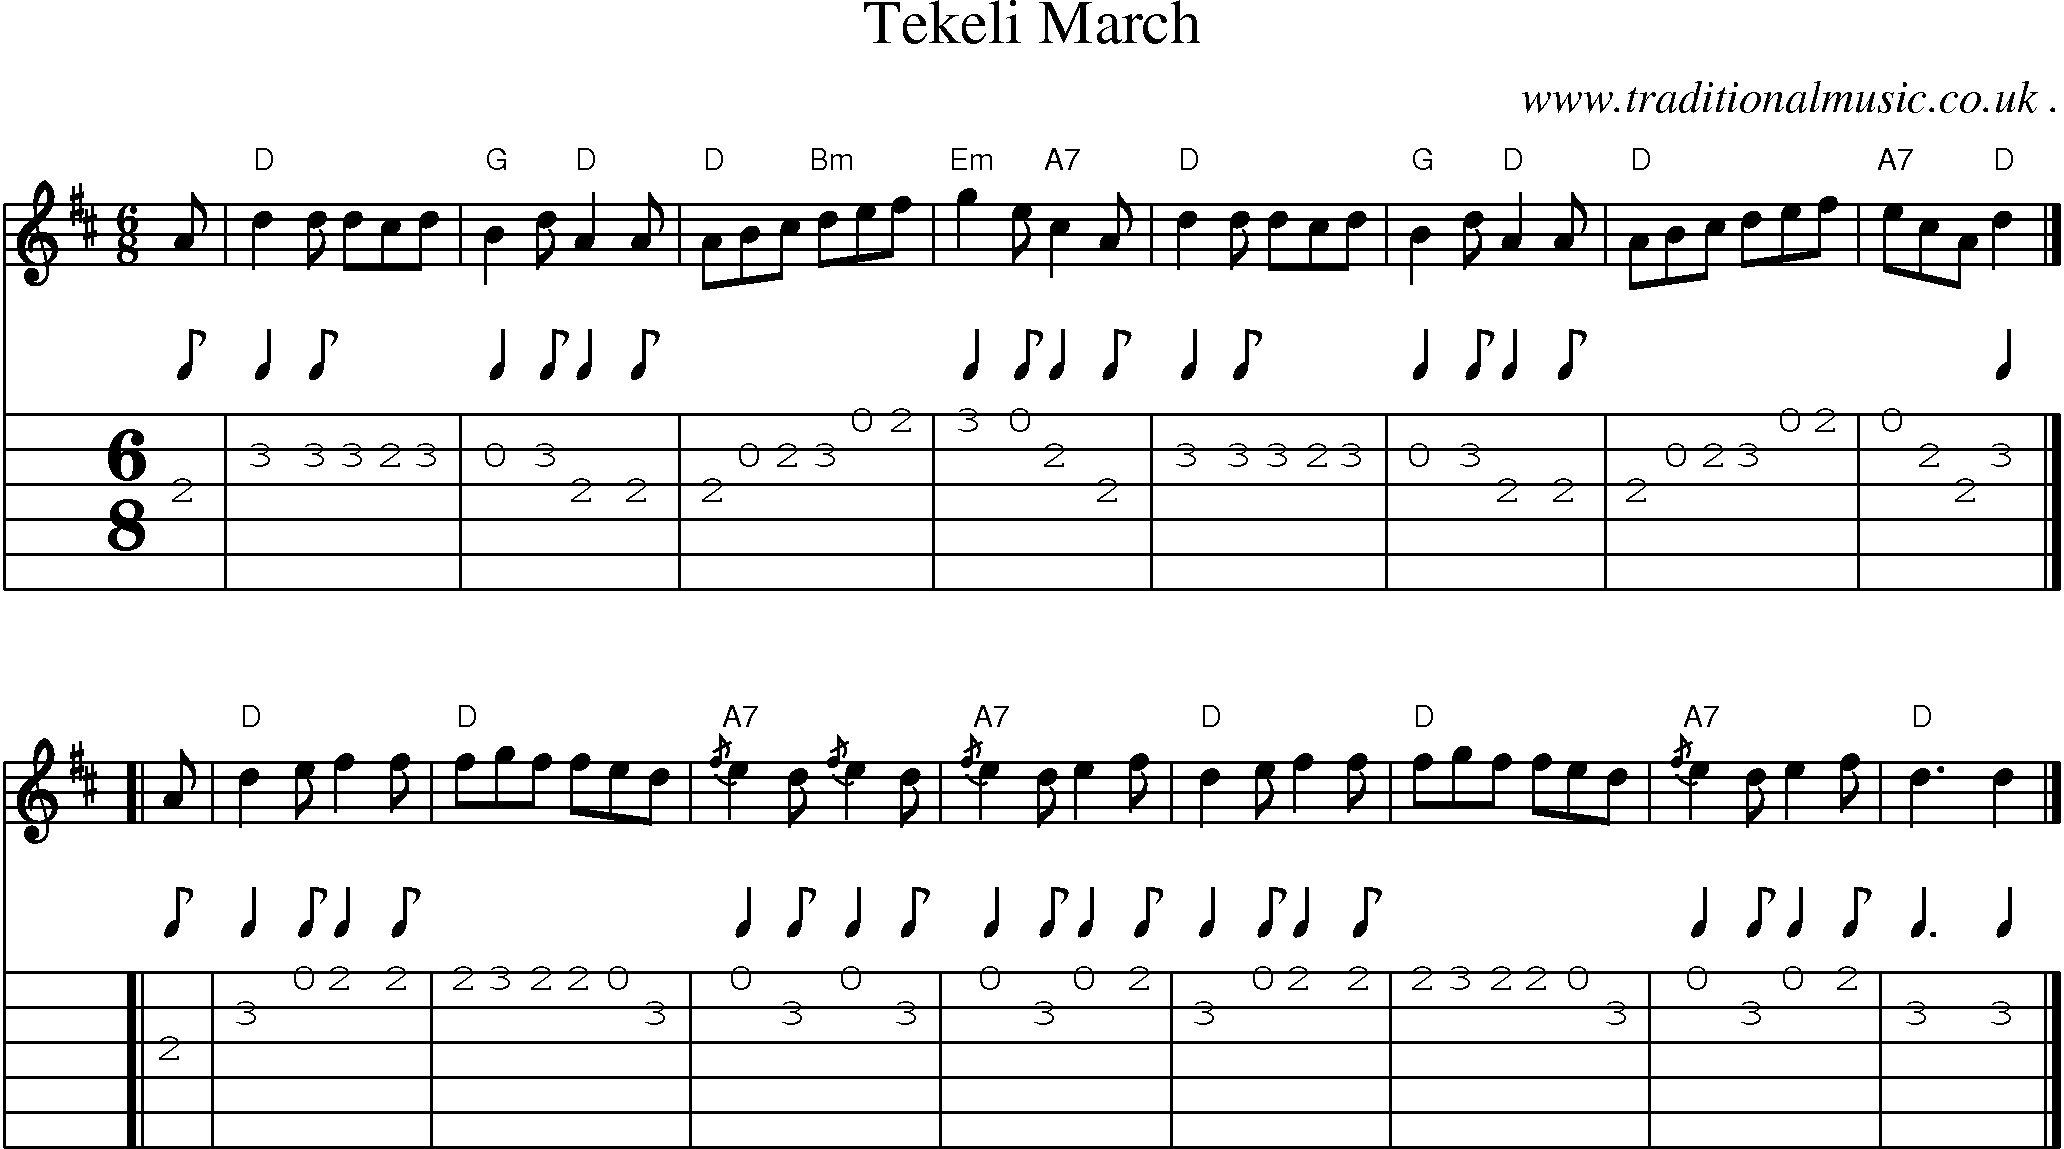 Sheet-music  score, Chords and Guitar Tabs for Tekeli March